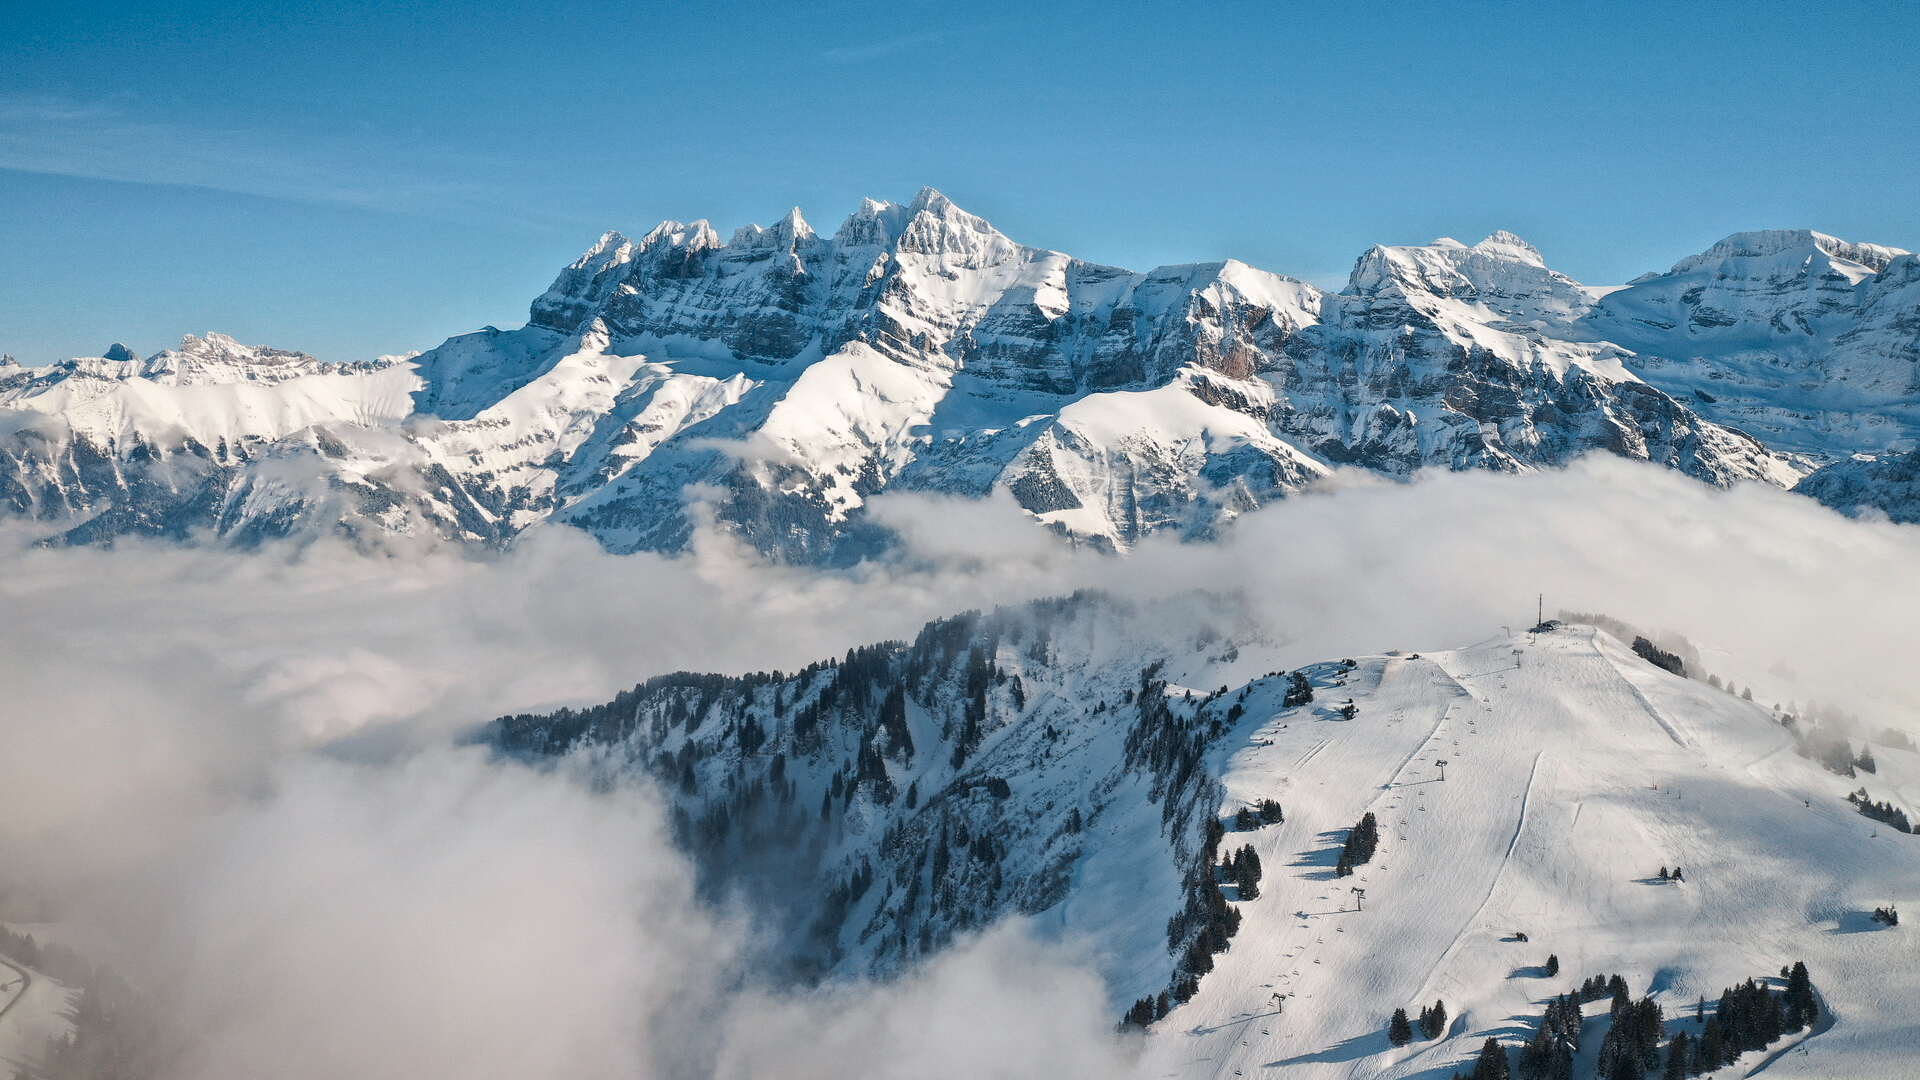 Just two of the jewels in our crown - the Les Crosets ski slopes and the soaring Dents du Midi.